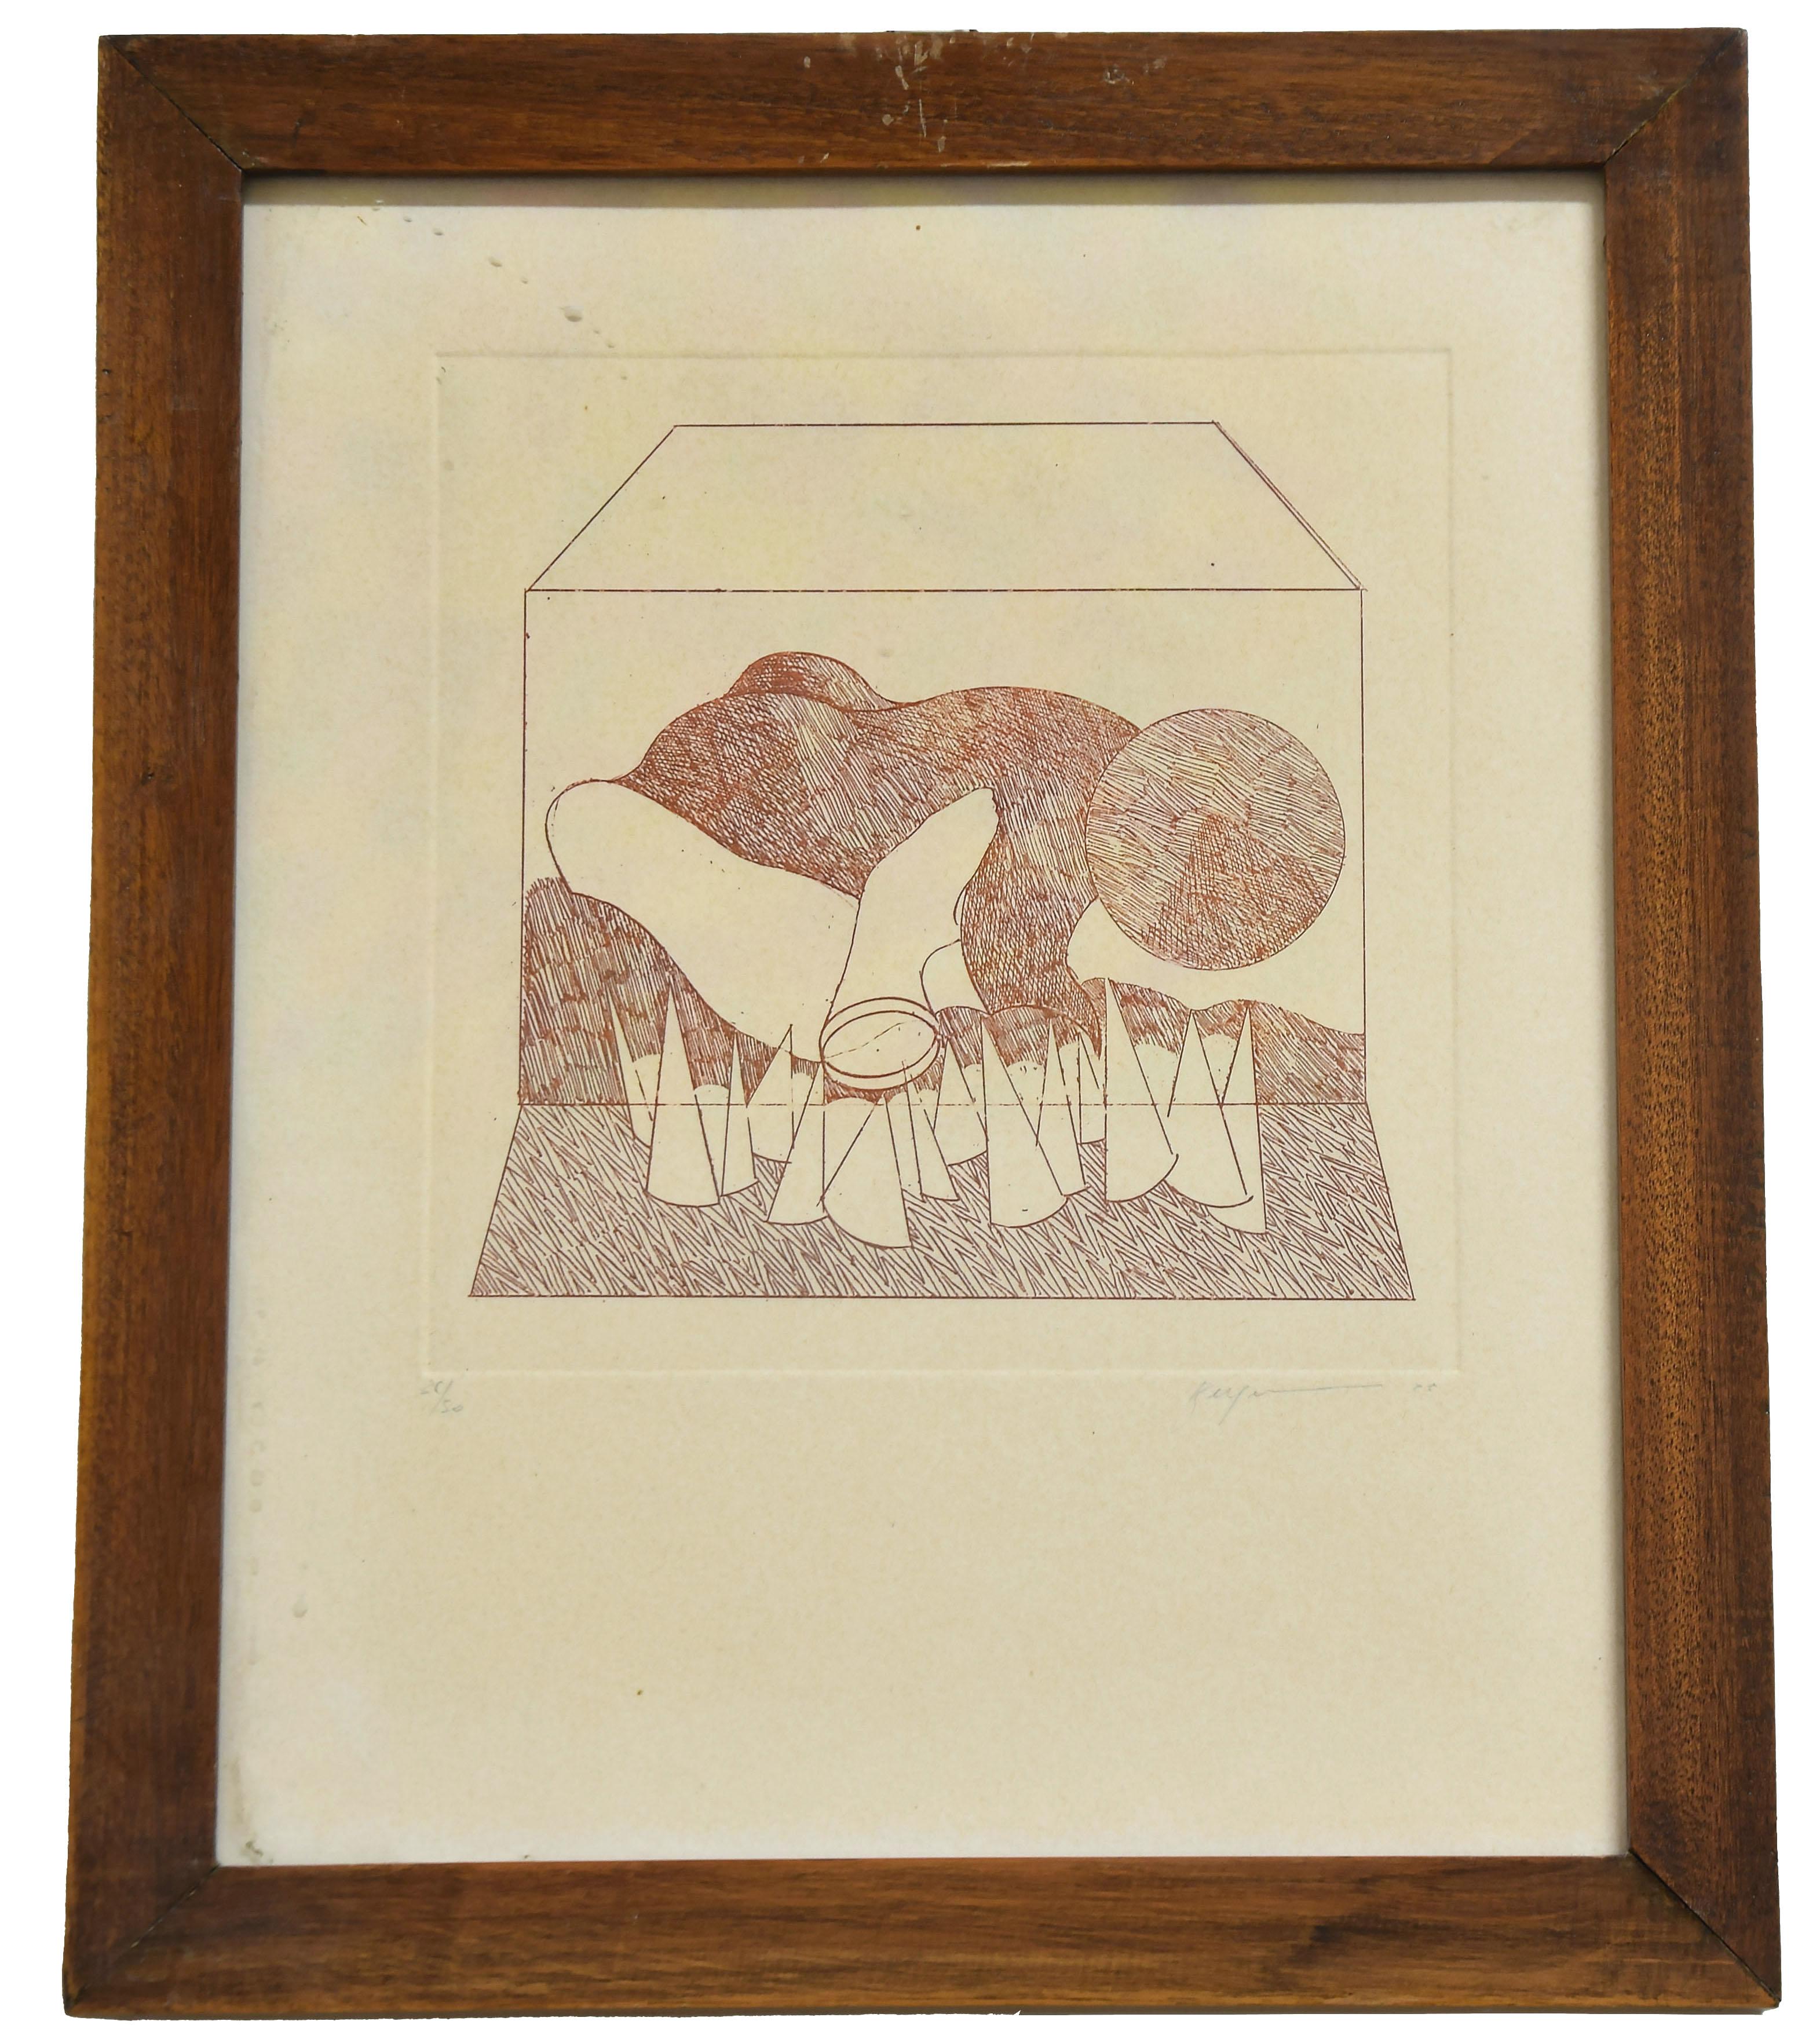 Abstract Composition - Original Etching by Danilo Bergamo - 1975 1